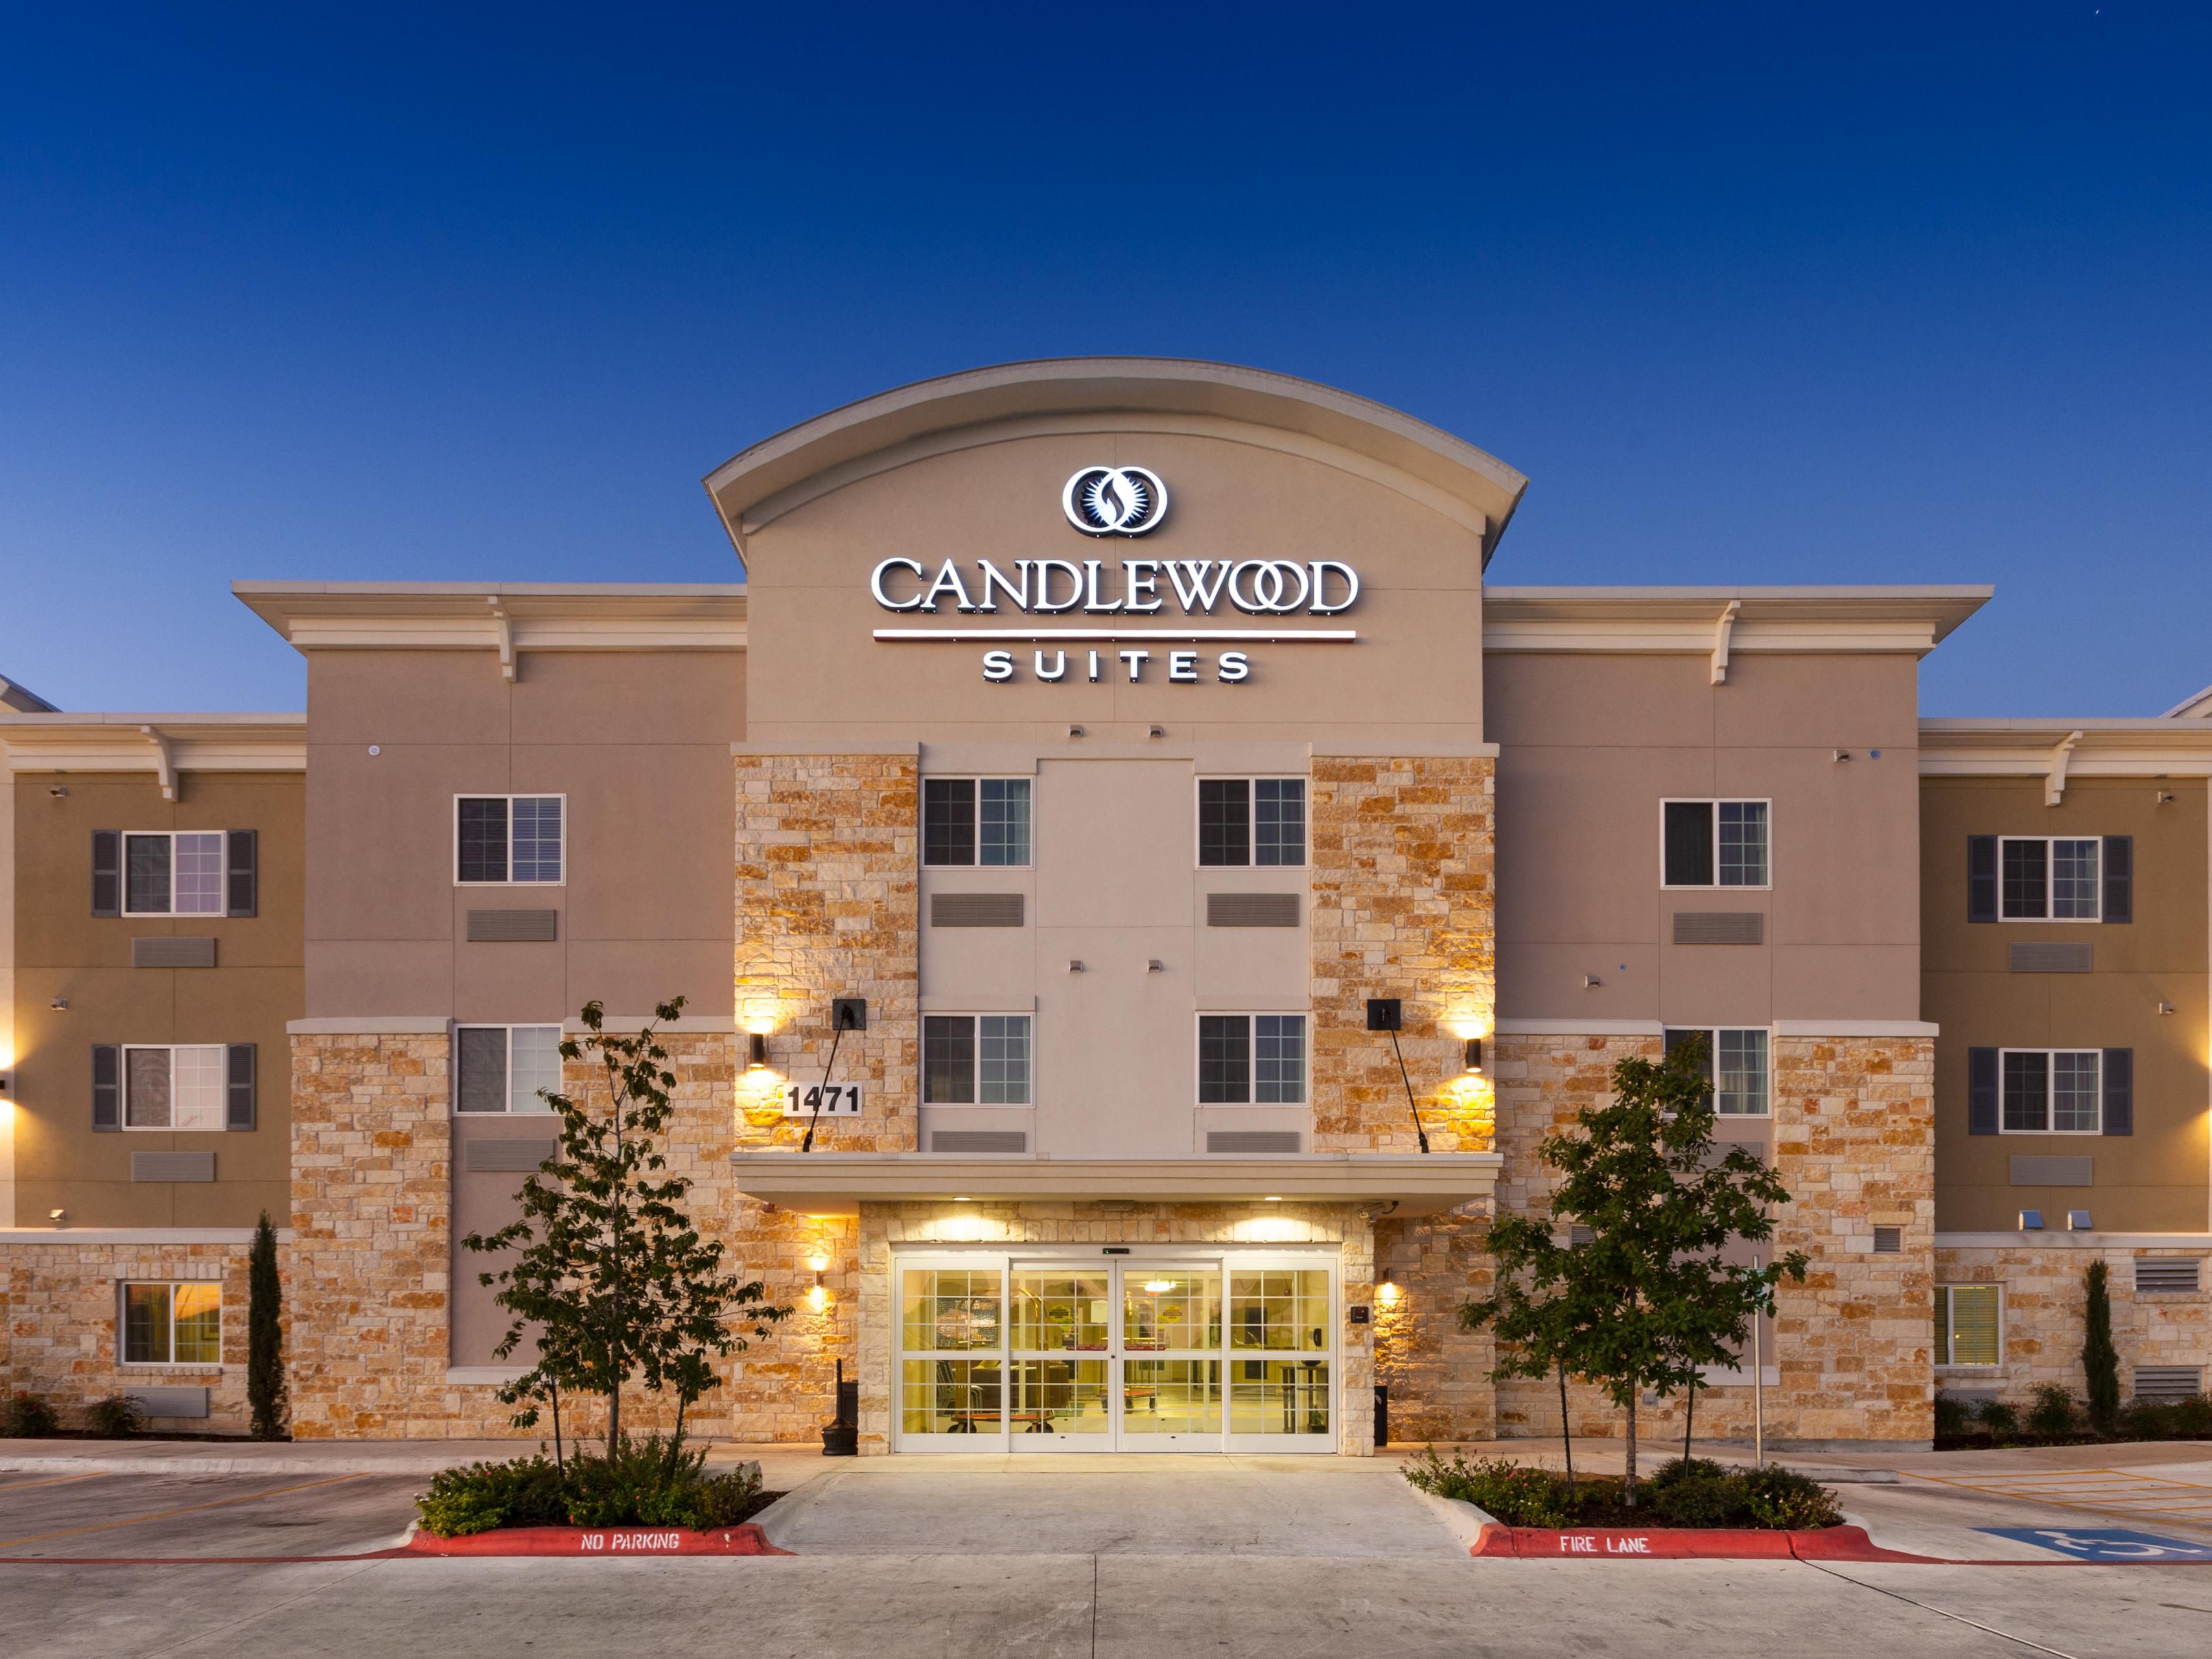 New Braunfels Hotels: Candlewood Suites New Braunfels - Extended Stay